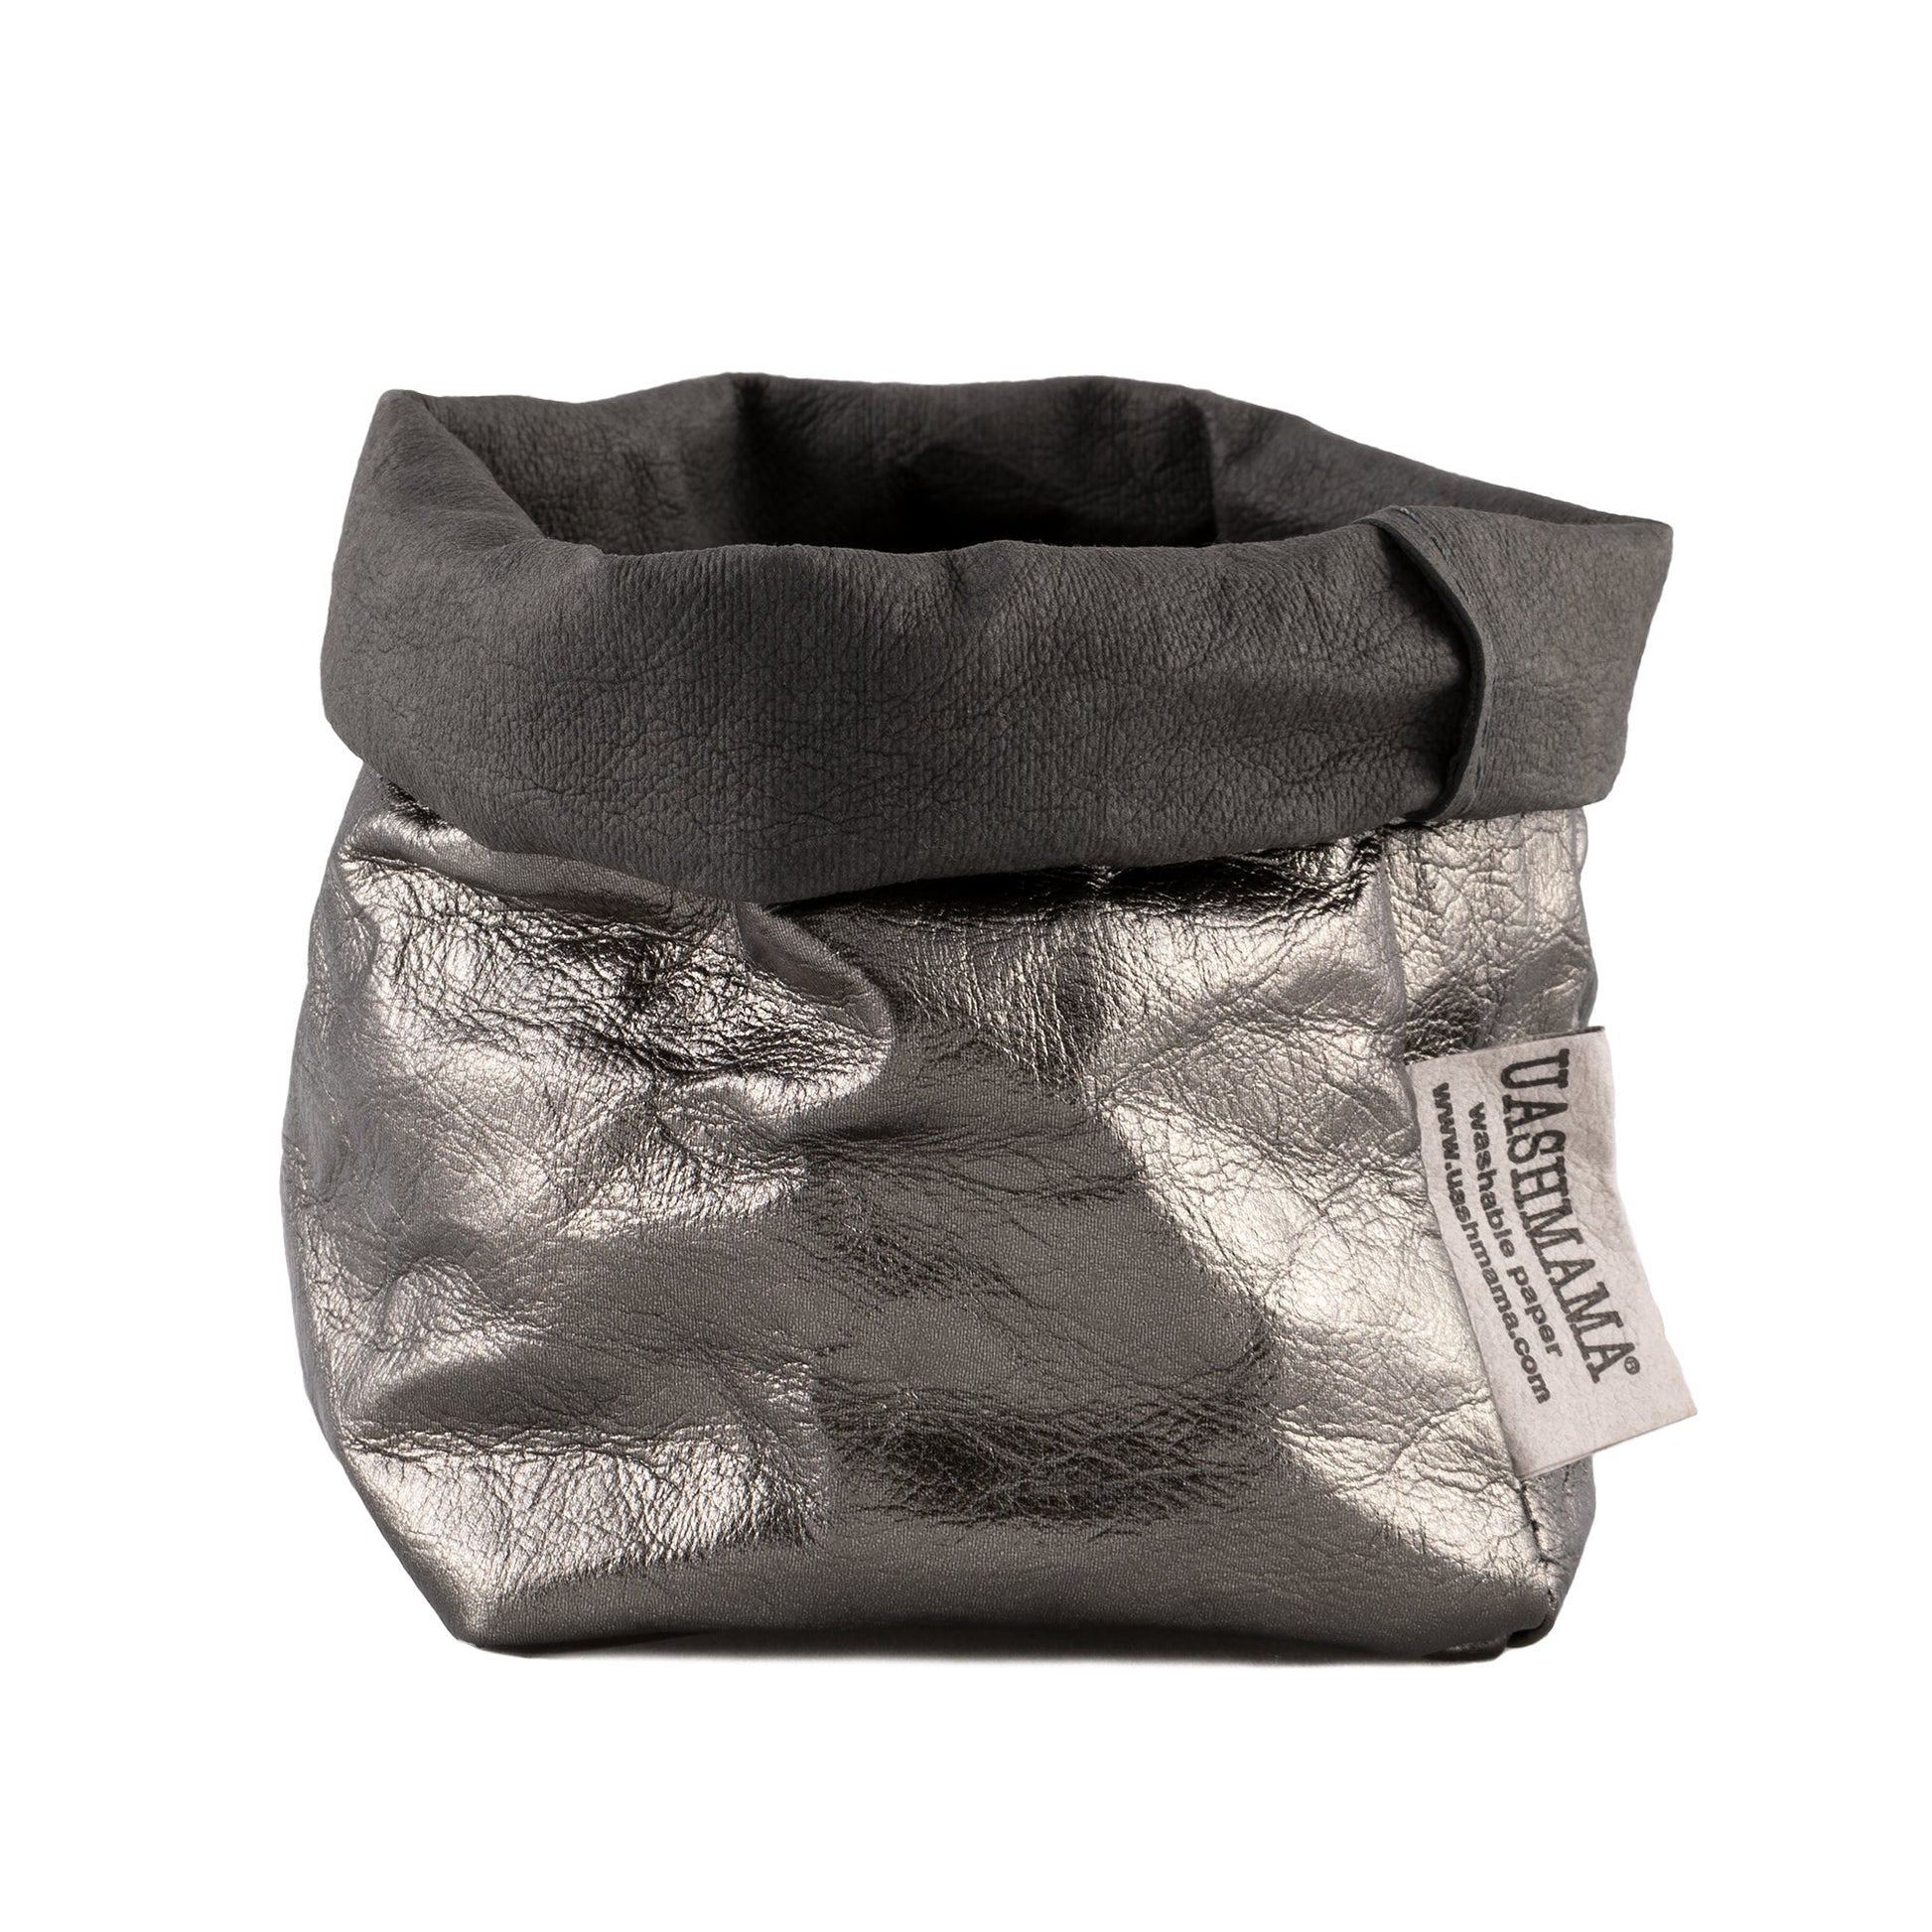 A washable paper bag is shown. The bag is rolled down at the top and features a UASHMAMA logo label on the bottom left corner. The bag pictured is the piccolo size in metallic dark grey.